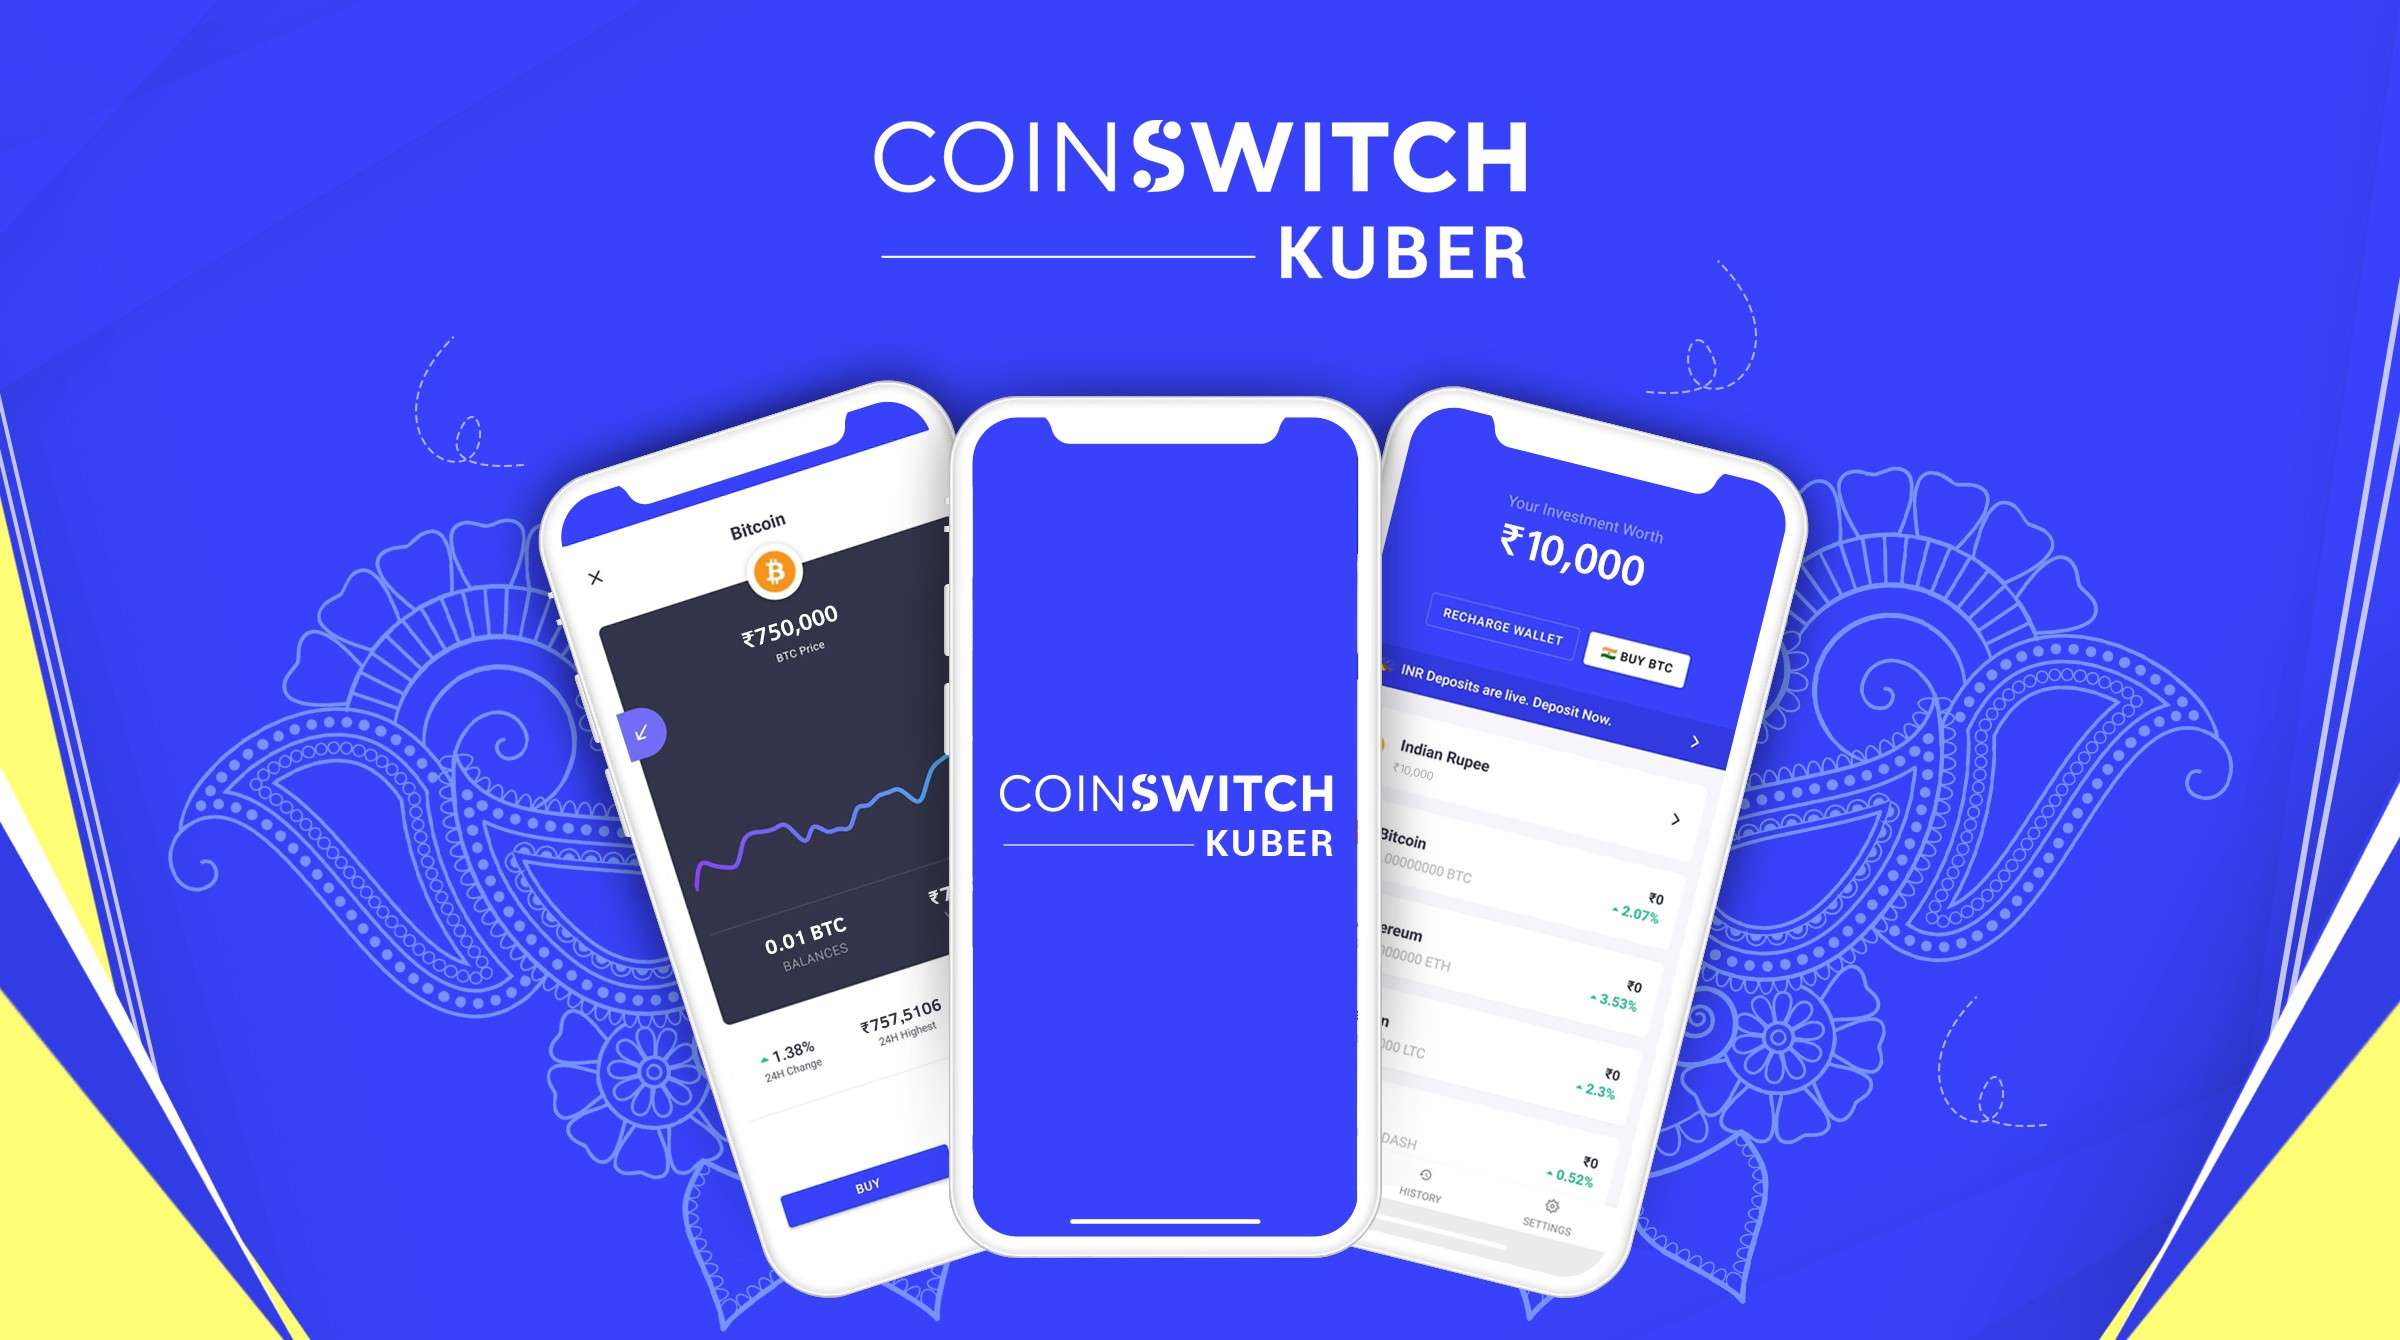 CoinSwitch Kuber: you-can-also-invest-in-cryptocurrencies-with-a-small-amount-like-rs-100